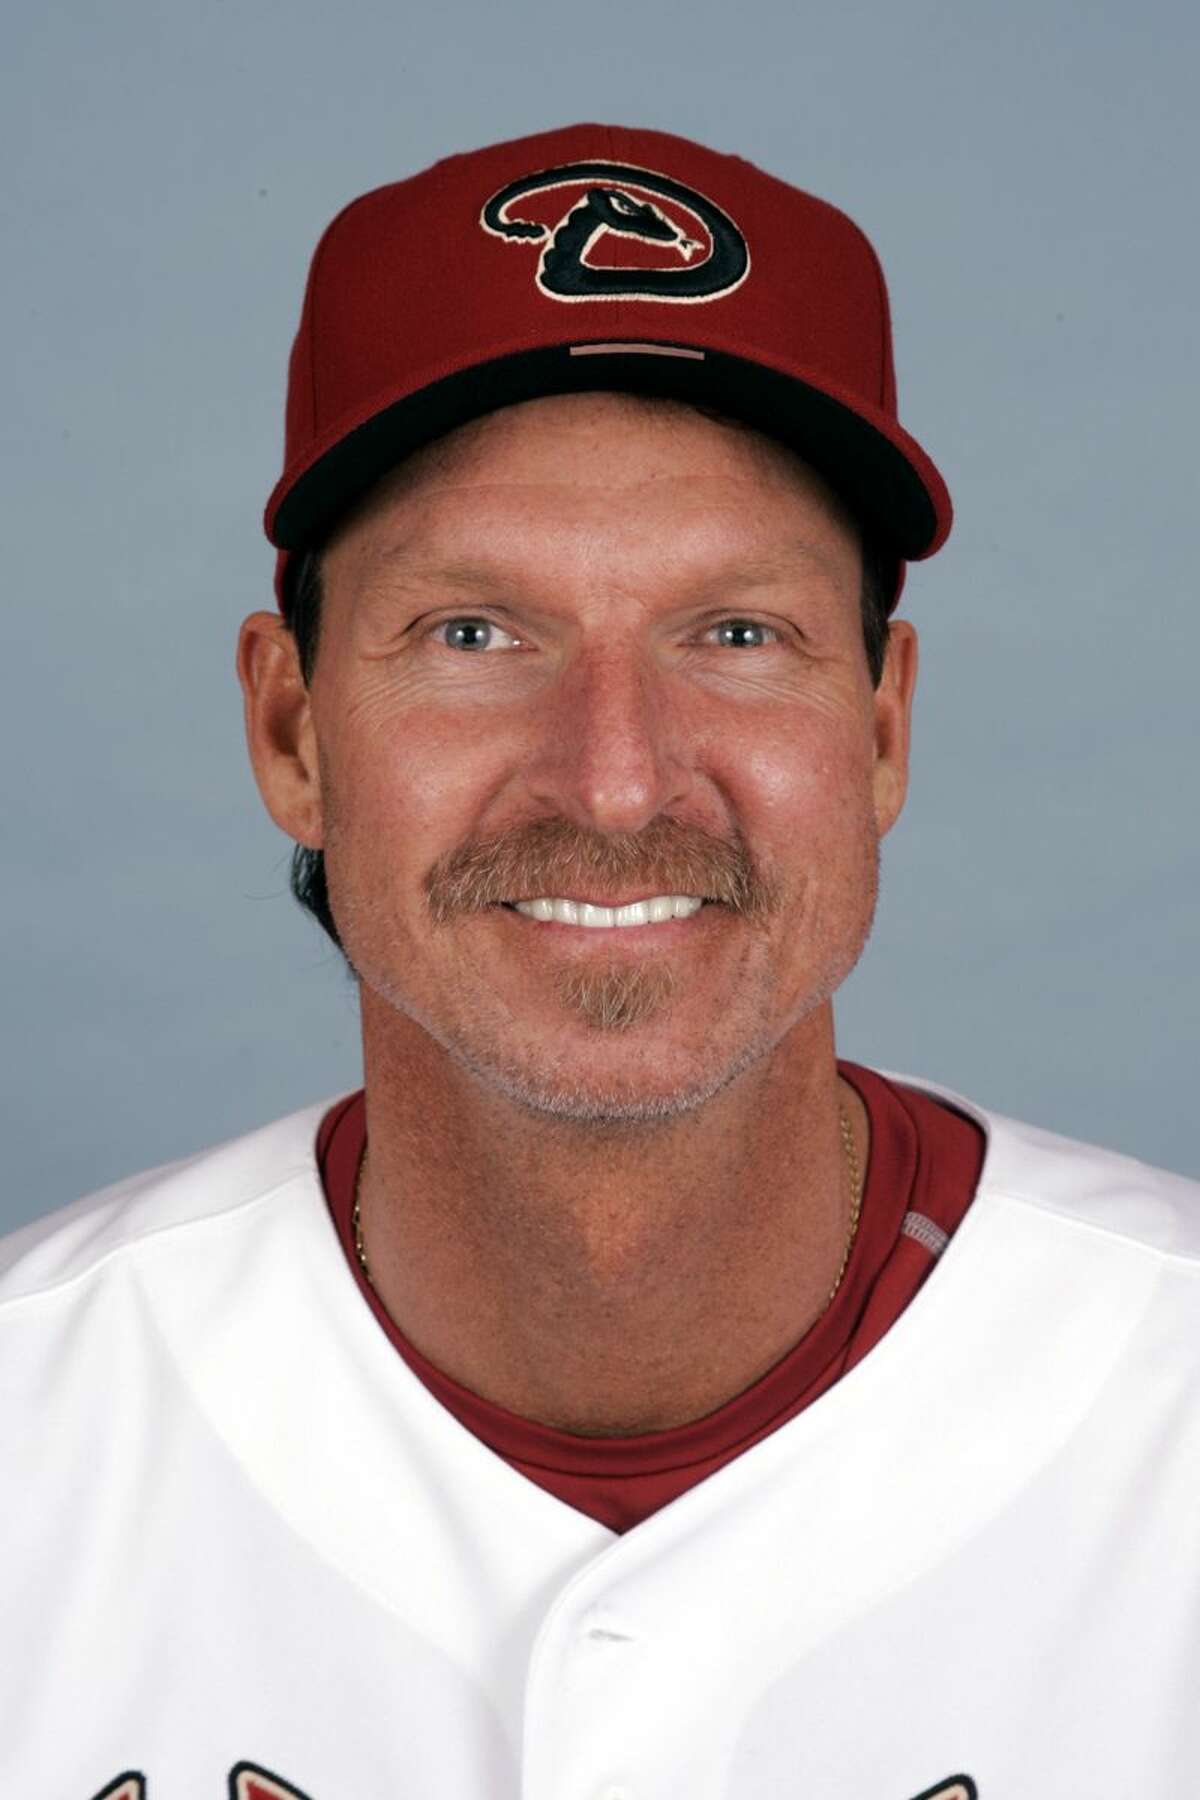 The Hall of Fame announced on Friday that Randy Johnson will wear an Arizona Diamondbacks cap on his plaque in baseball’s Hall of Fame.